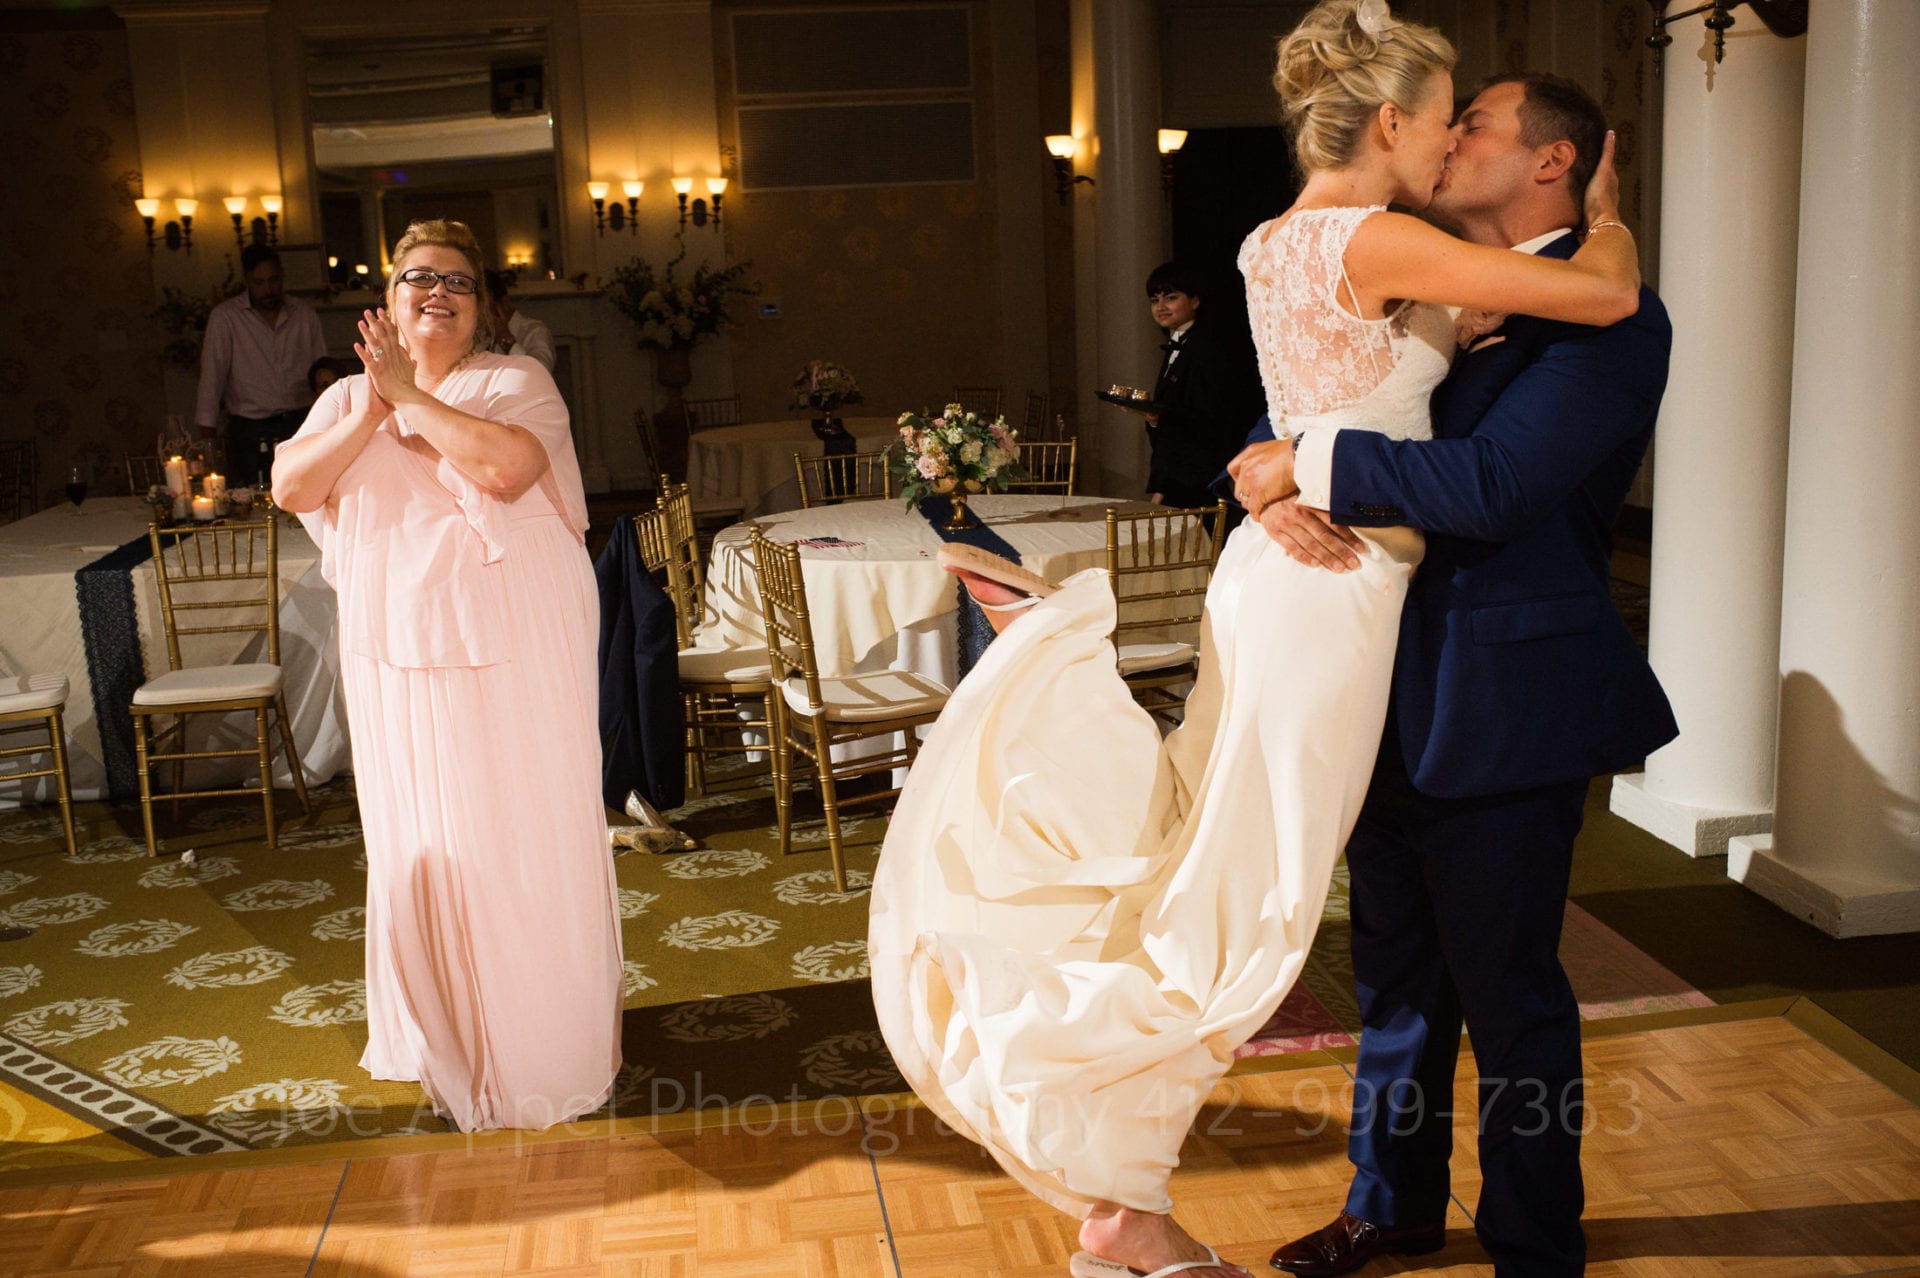 A groom lifts his bride off of the ground as he kisses her at the end of their Omni Bedford Springs Resort Wedding. A bridesmaid applauds as she looks on.